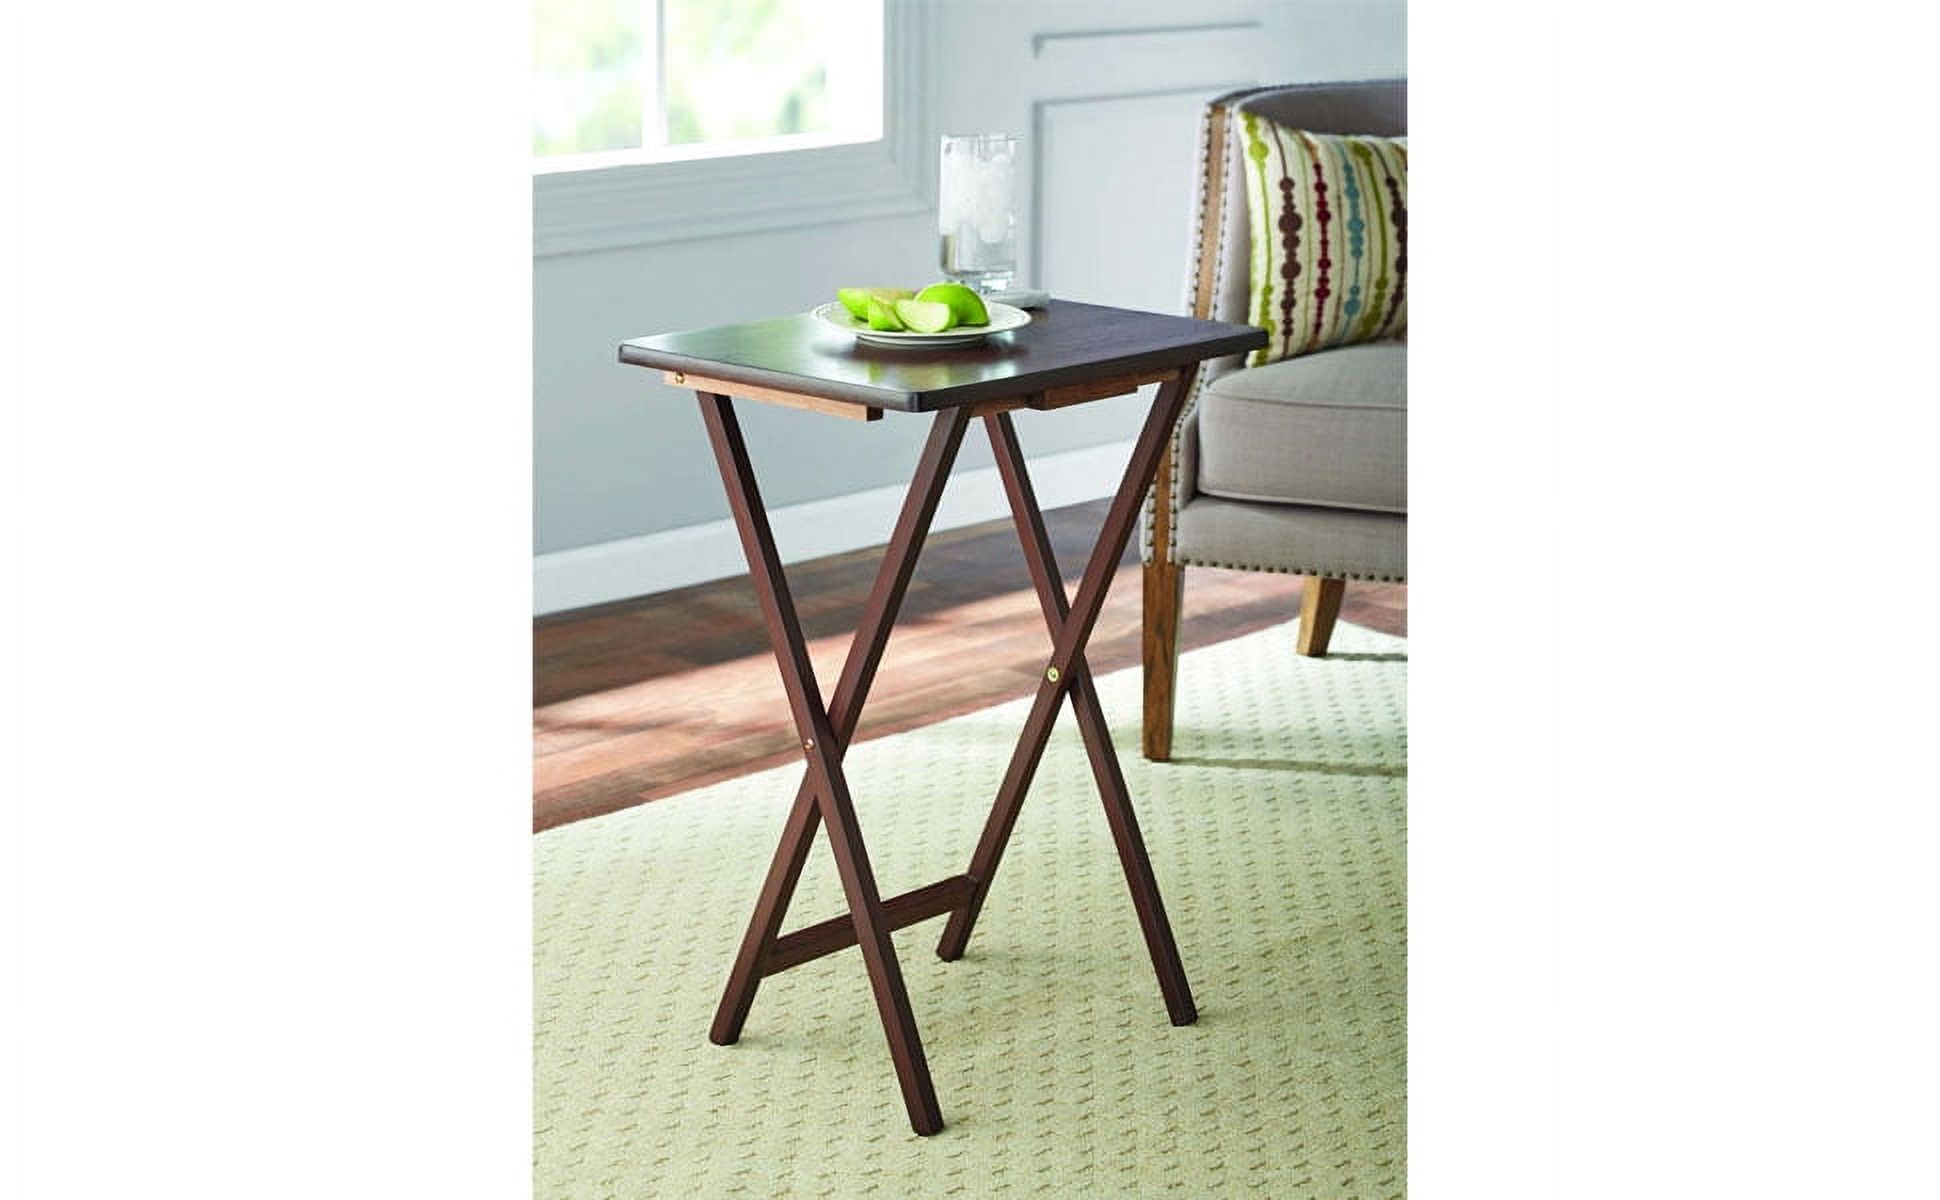 Mainstays Indoor Single Folding TV Tray Table Set of 2 in Walnut L19 x W15 x H26inches. - image 3 of 5